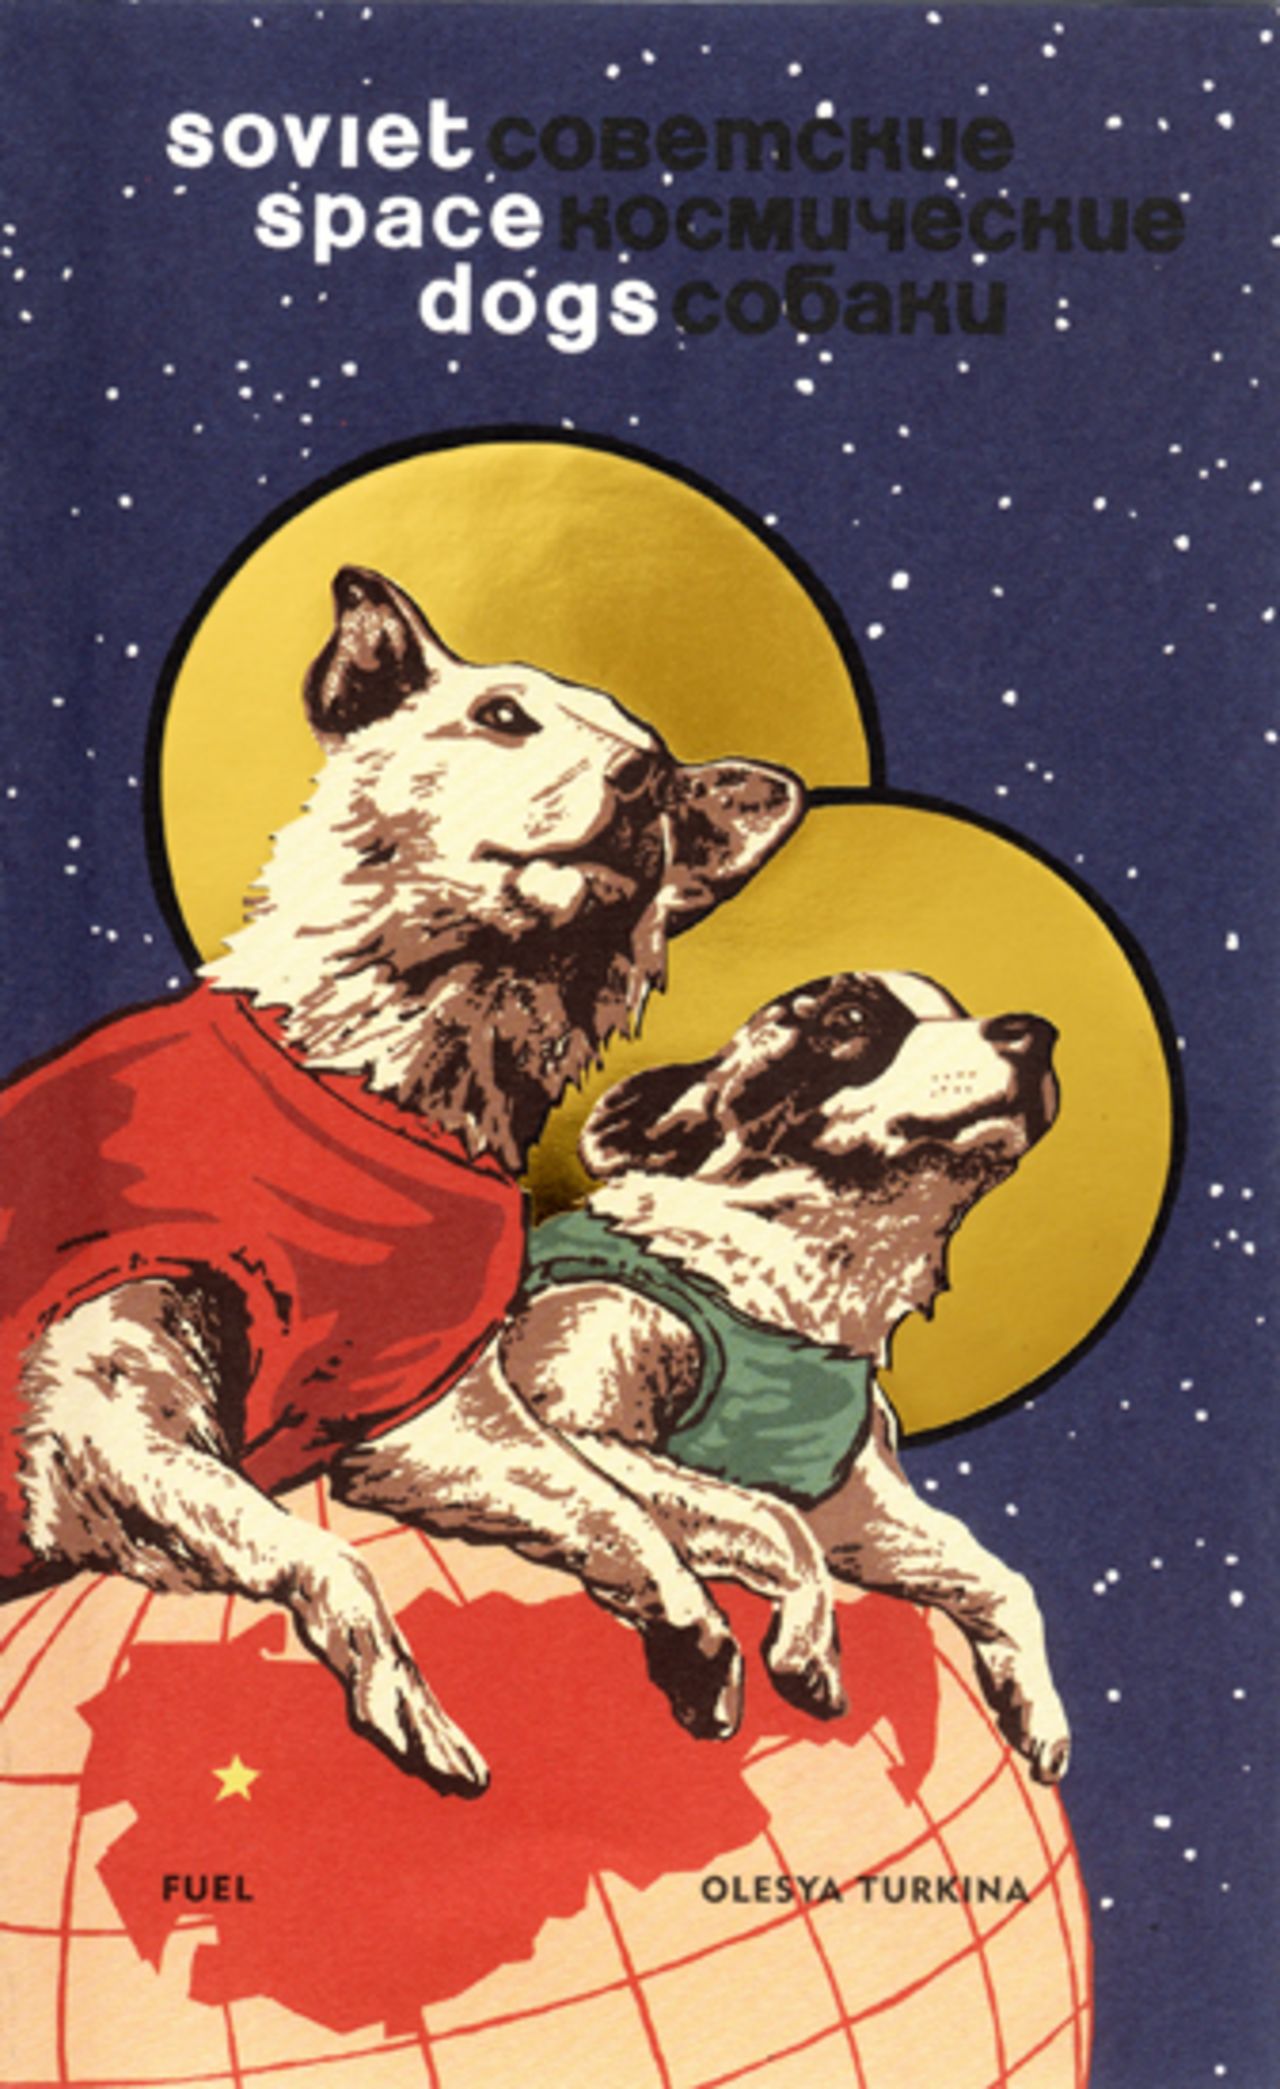 During the 1950s, USSR propaganda artists produced a huge range of emblematic images celebrating the role of dogs in Soviet space exploration.